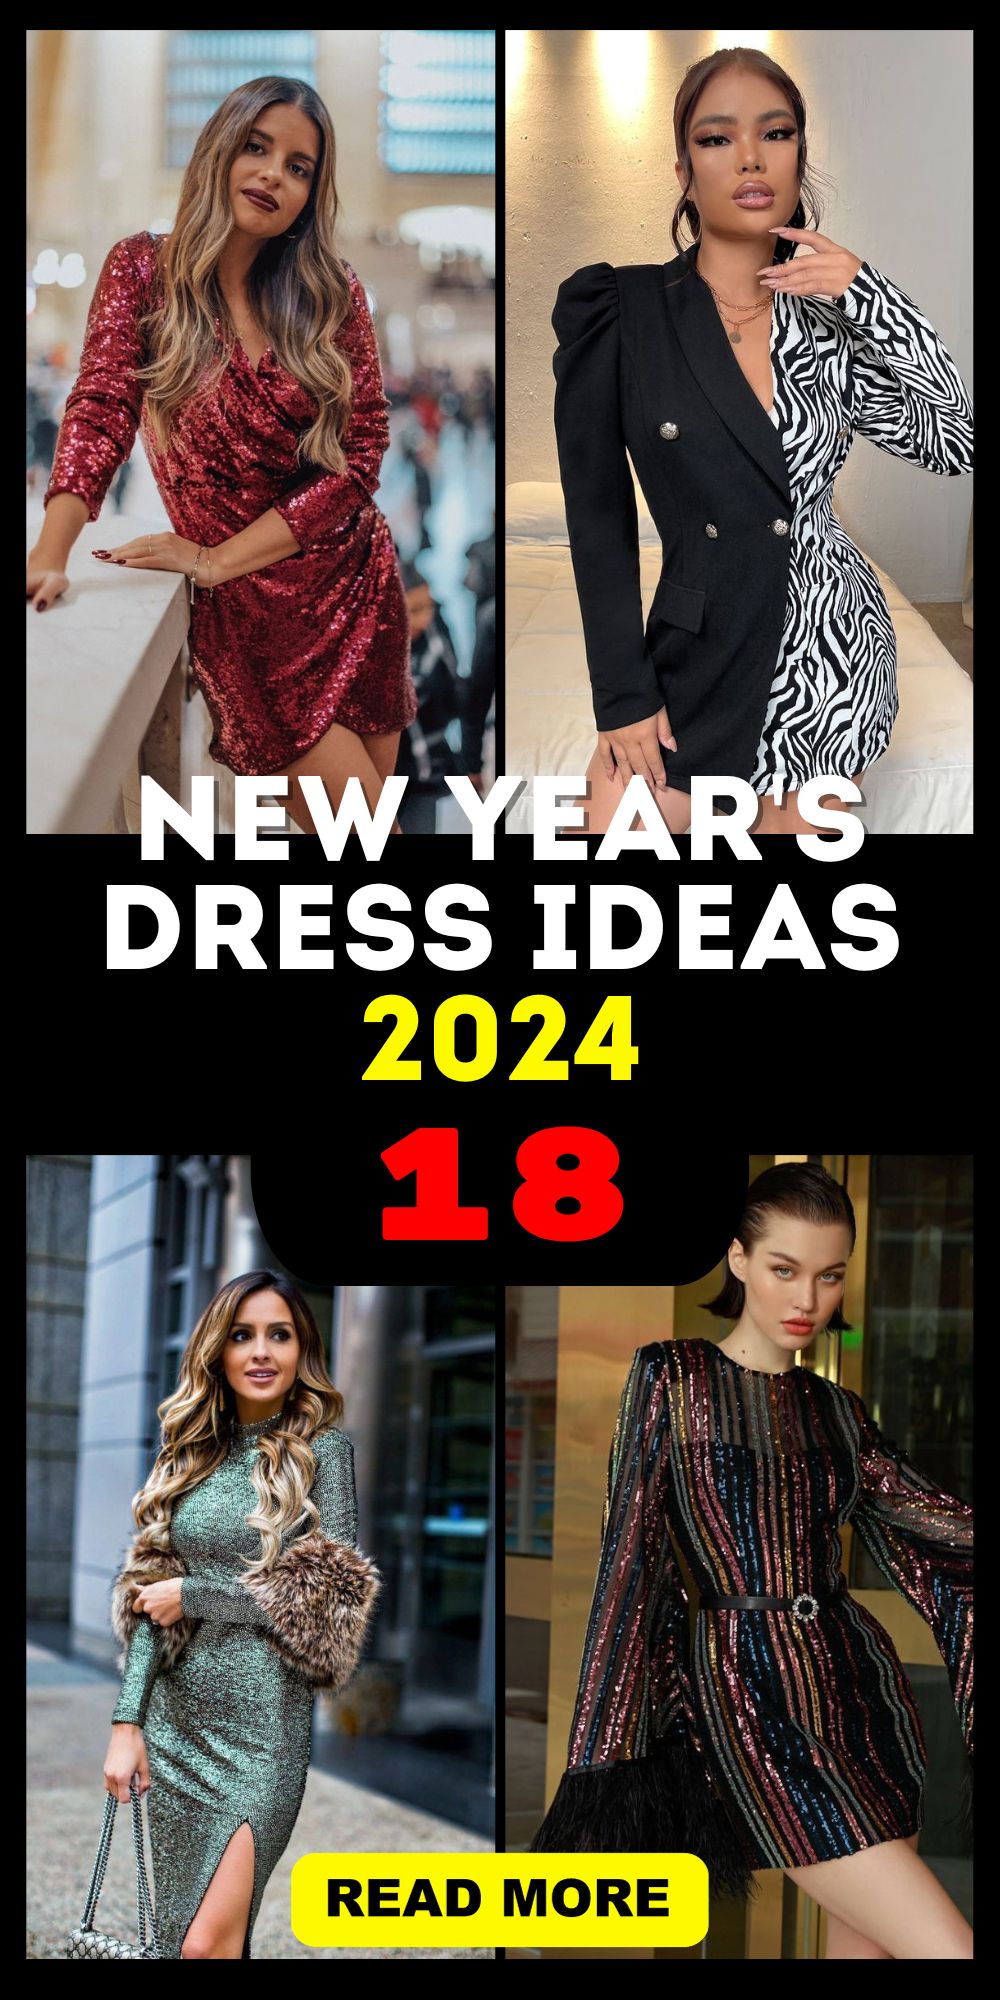 2024 New Year's Dress Ideas: Sparkly, Classy, Ethnic, and More!